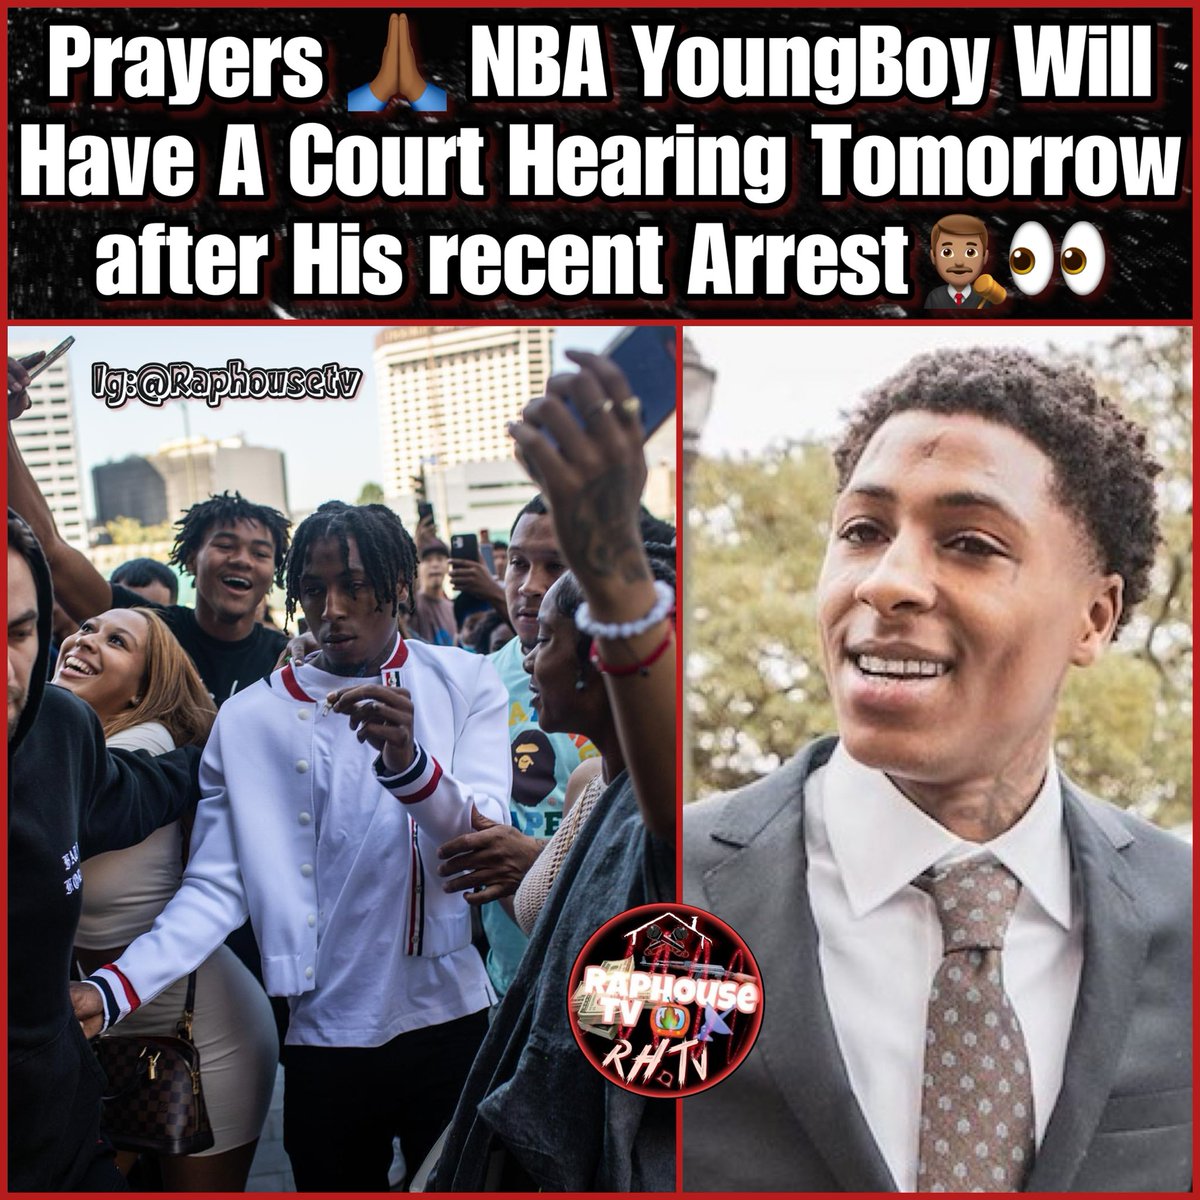 Prayers 🙏🏾 NBA YoungBoy Will Have A Court Hearing Tomorrow after His recent Arrest👨🏽‍⚖️👀